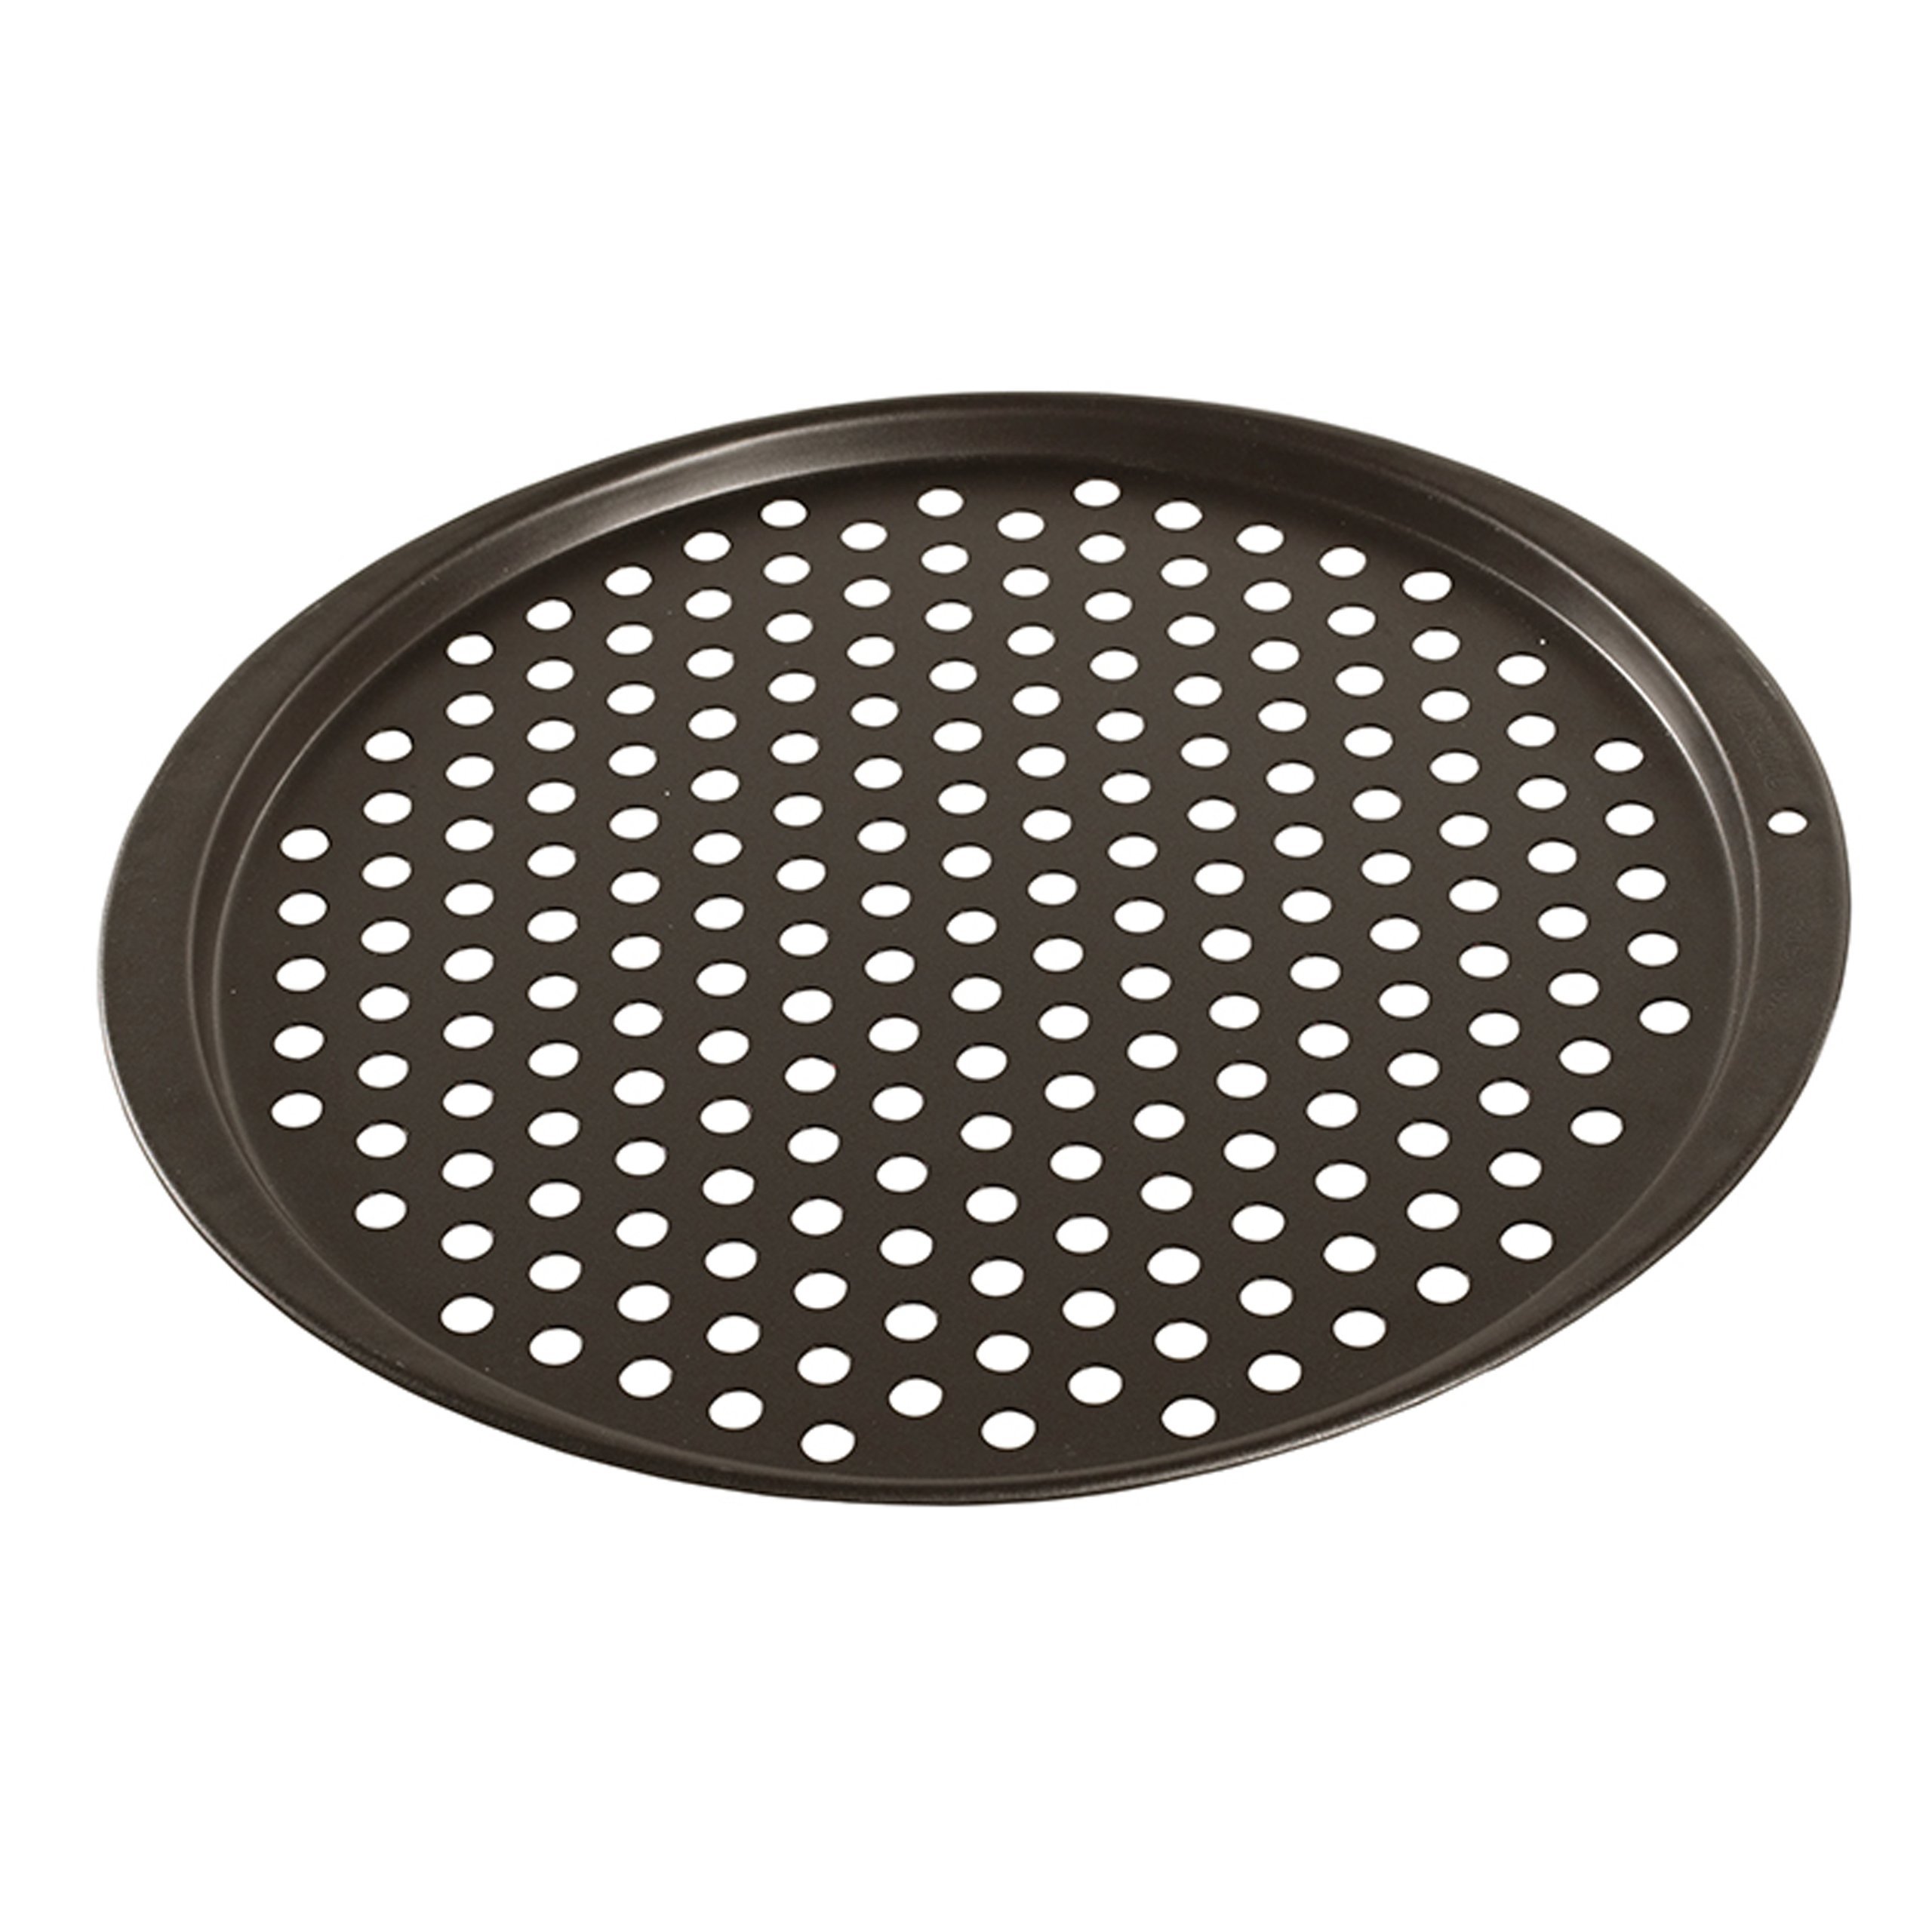 12" Nordic Ware 365 Indoor/Outdoor Pizza Pan $6.82 + Free Shipping w/ Prime or on $35+